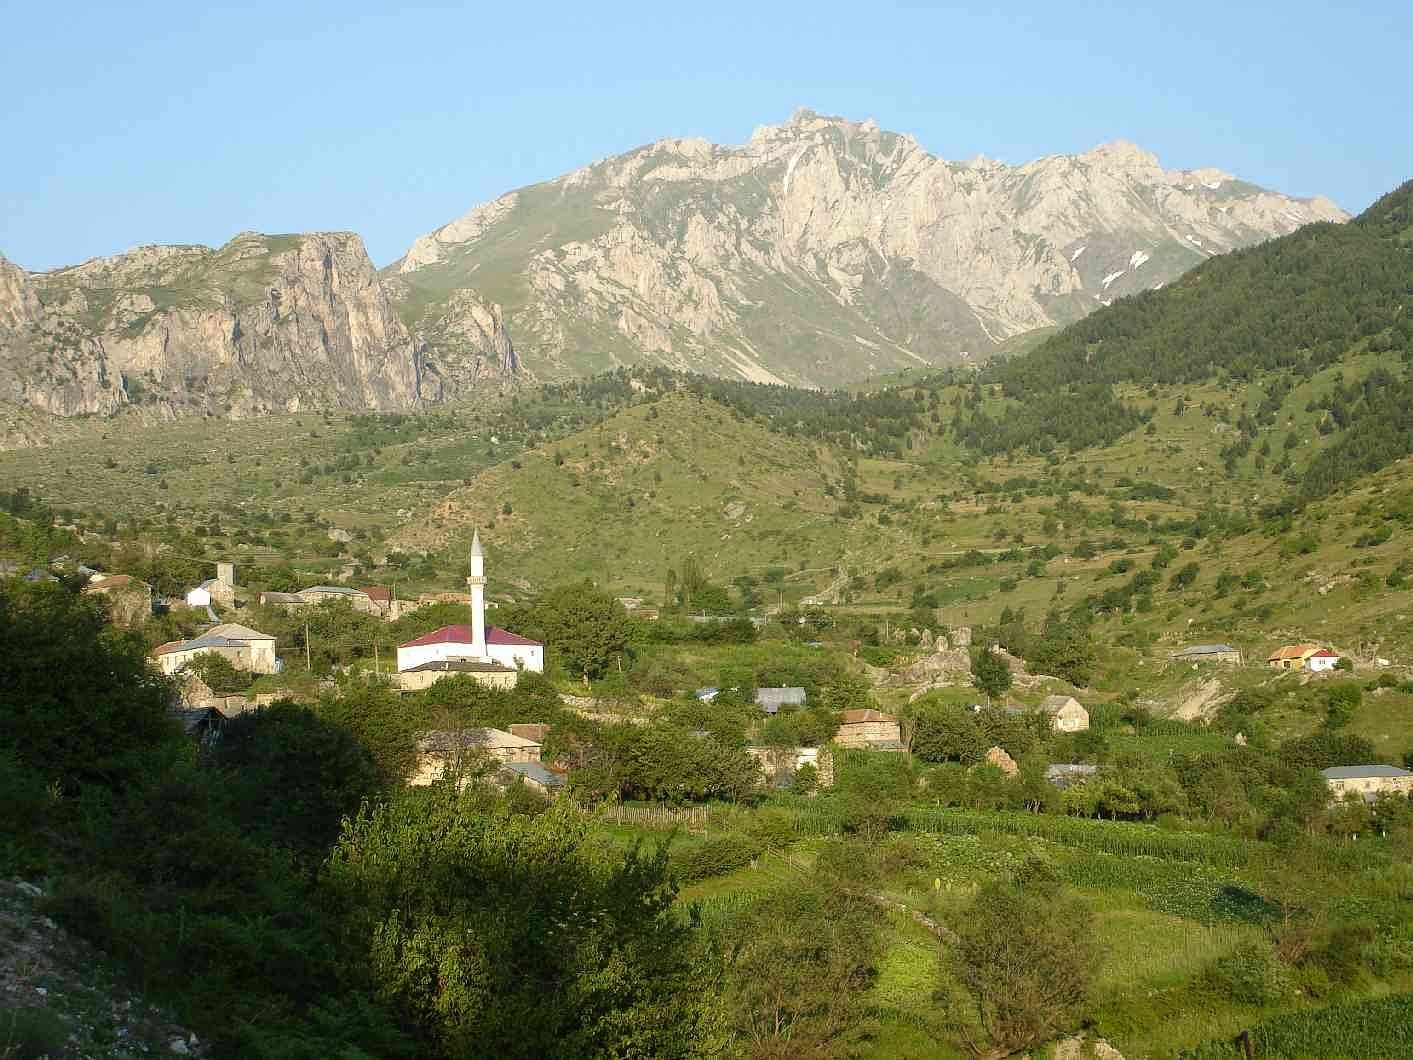 Mount Korab from the Albanian side.